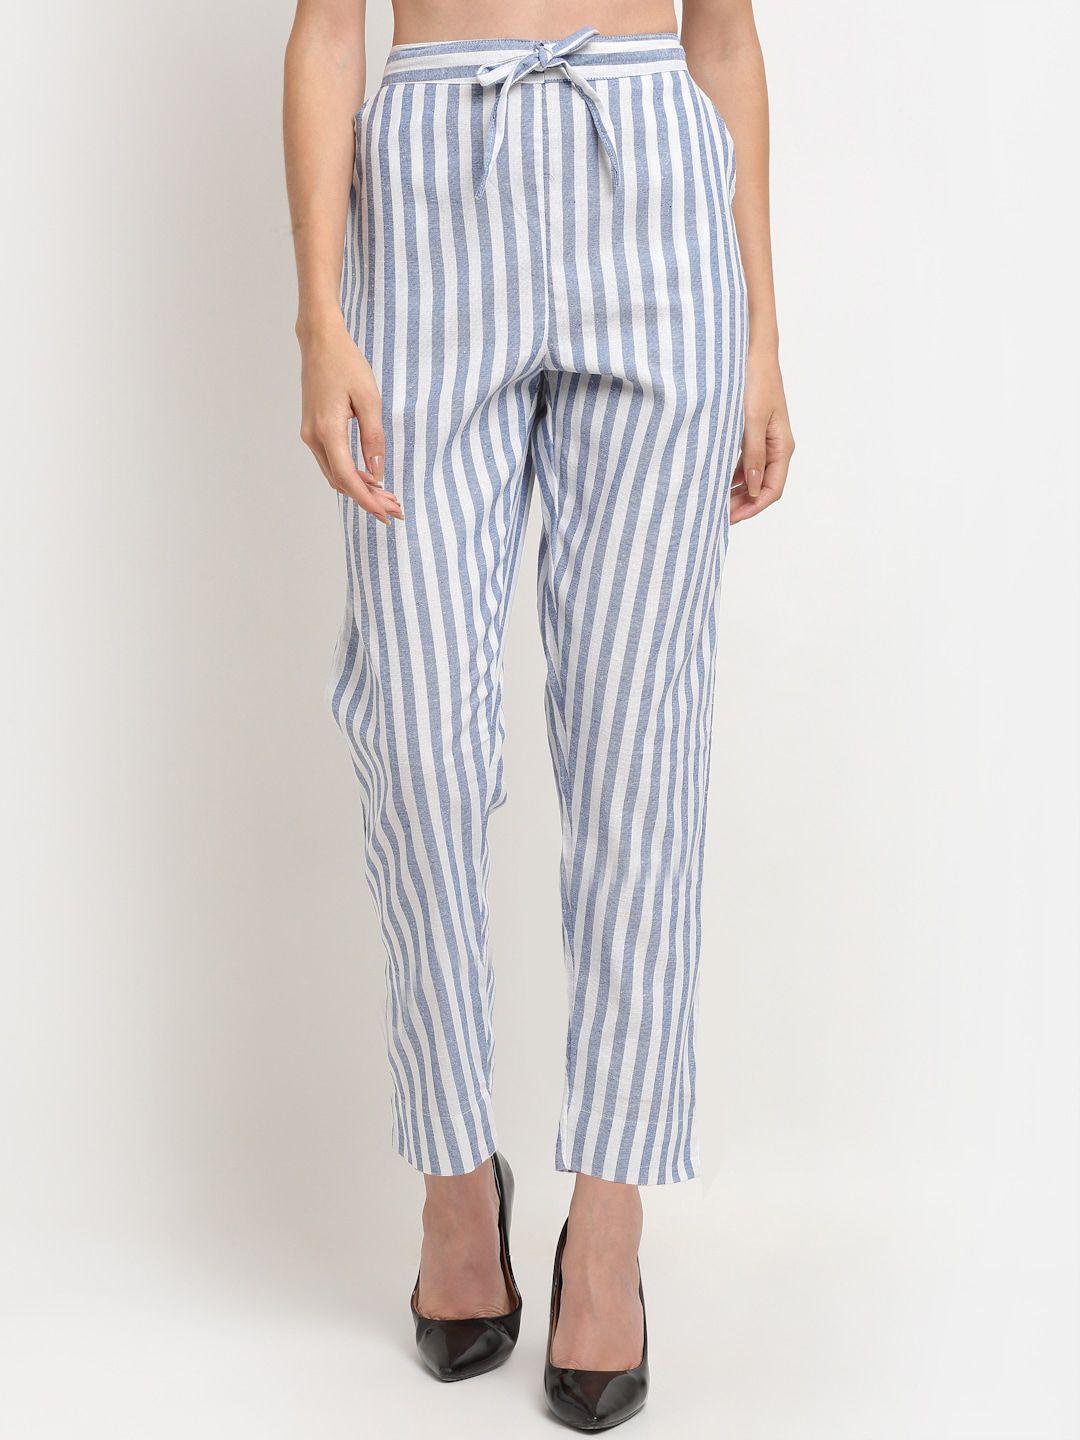 tag 7 women blue striped straight fit trousers